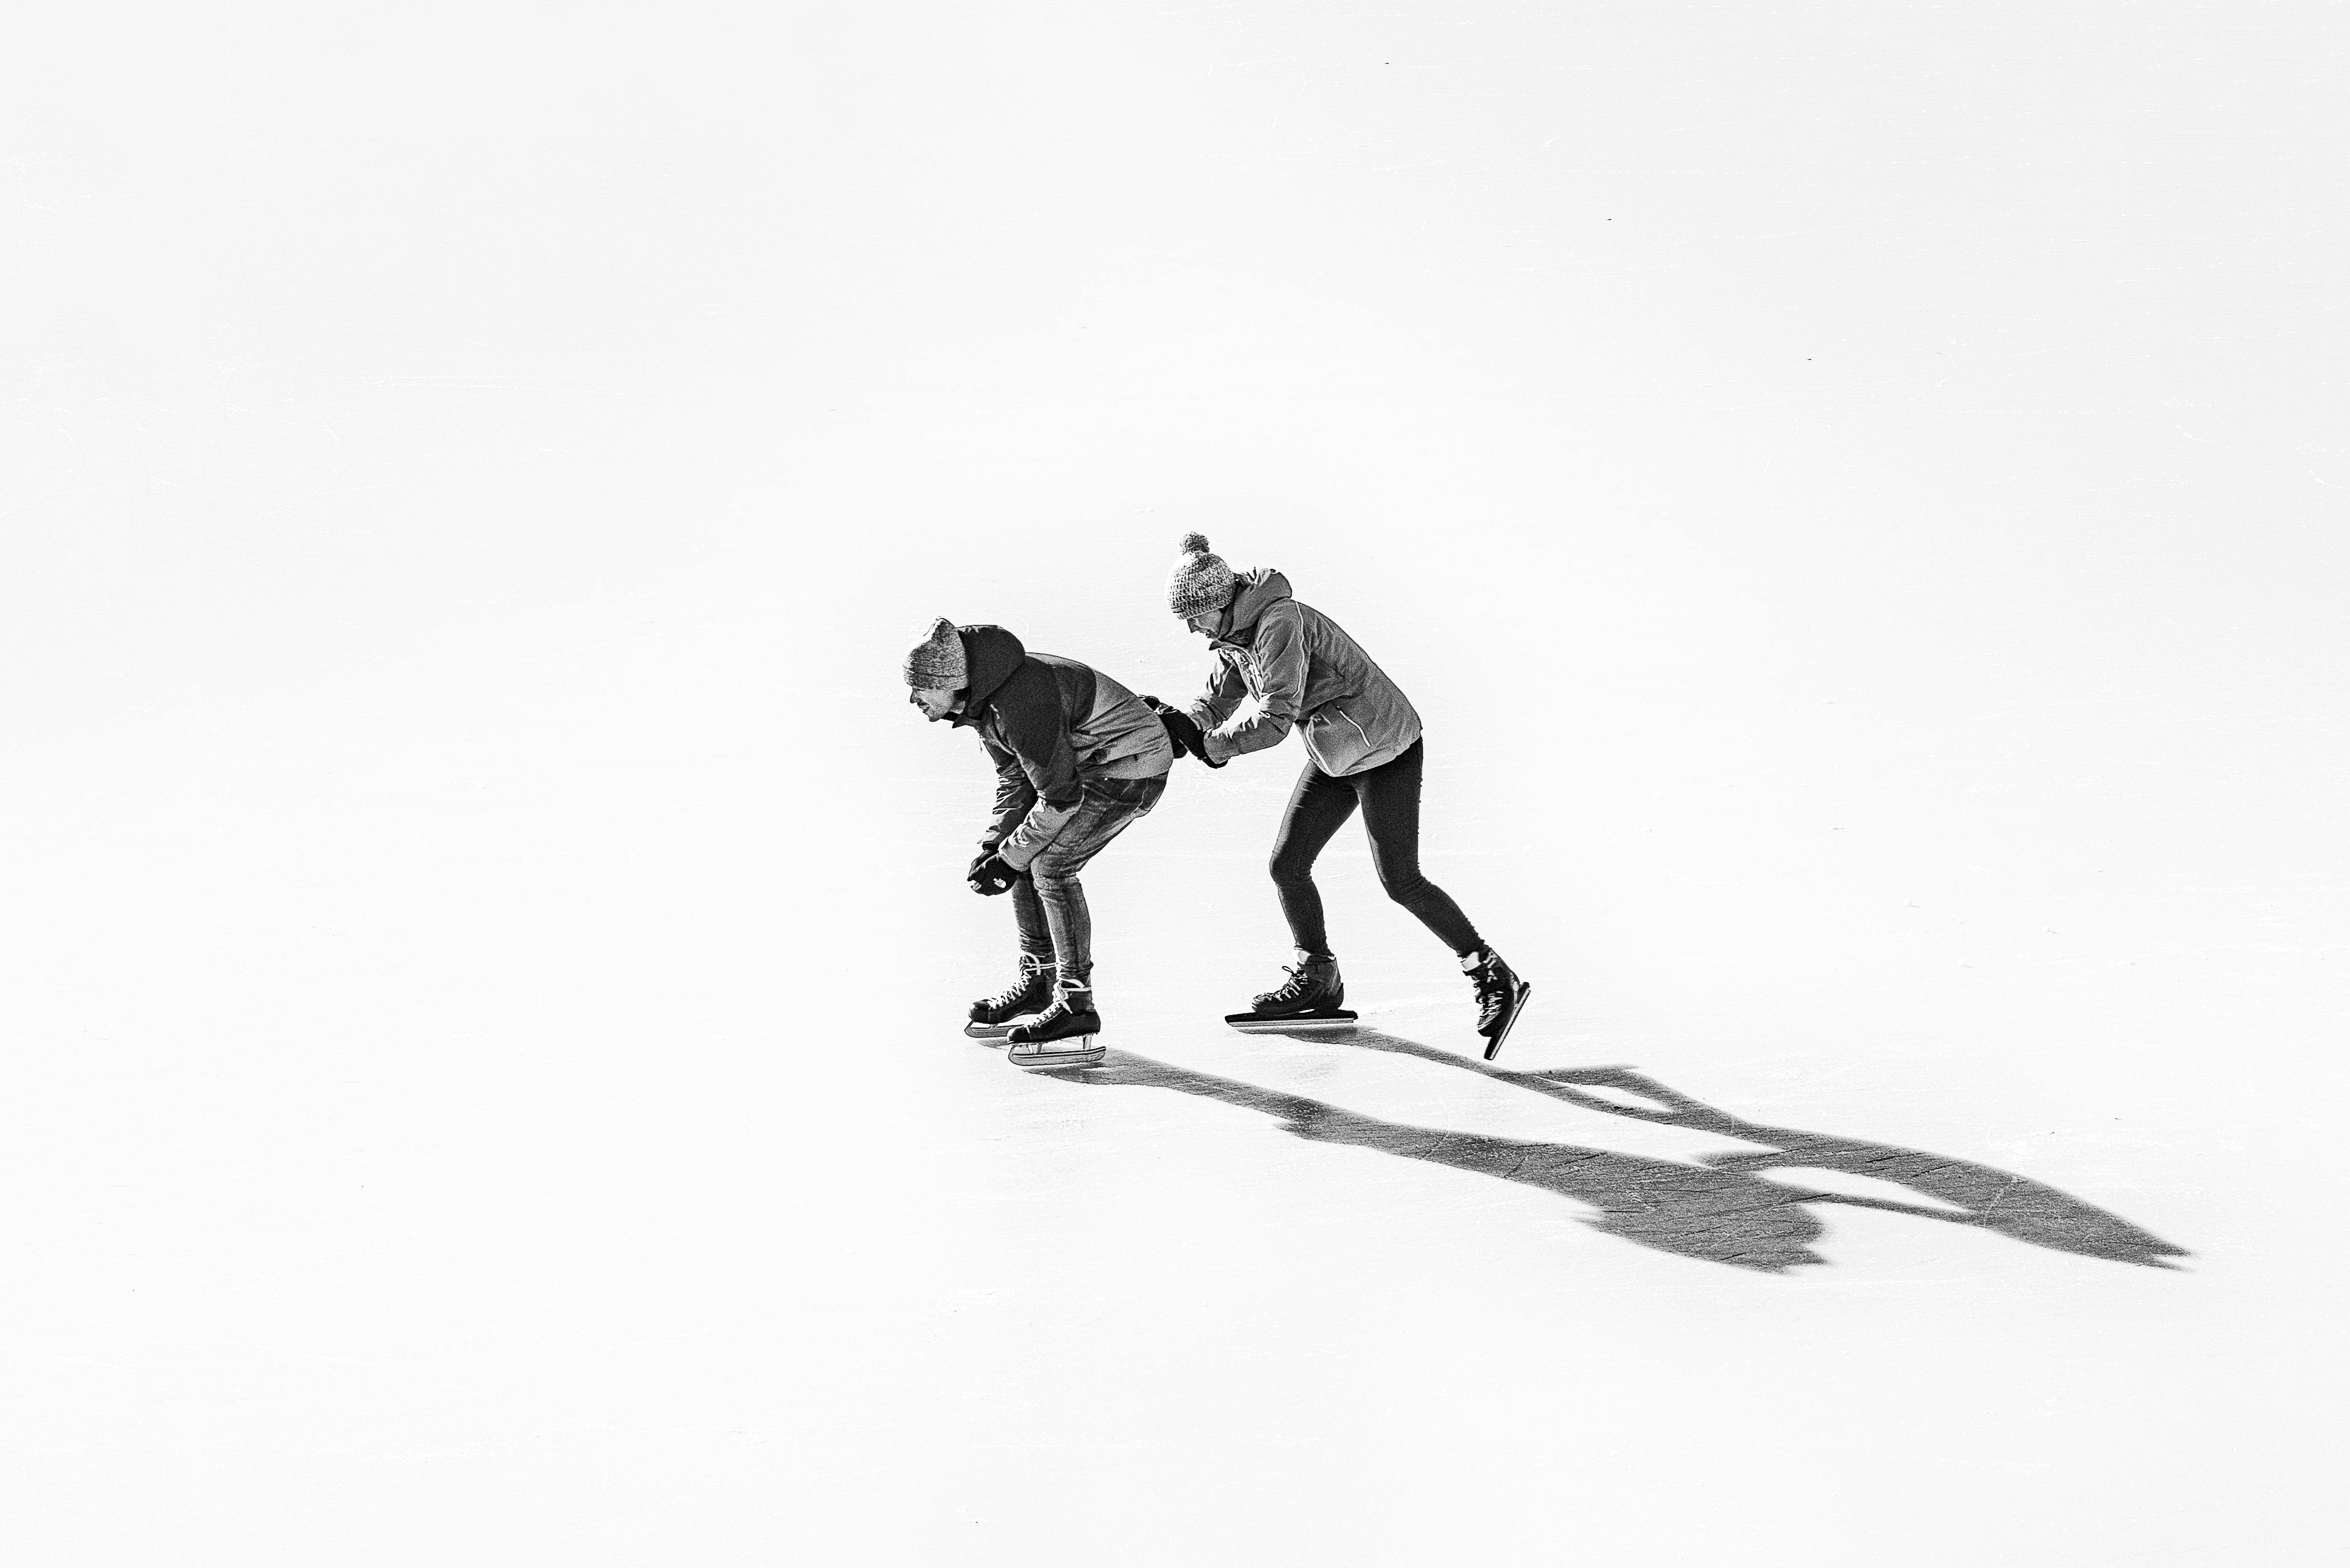 Black and white photo of two people skating on the ice.